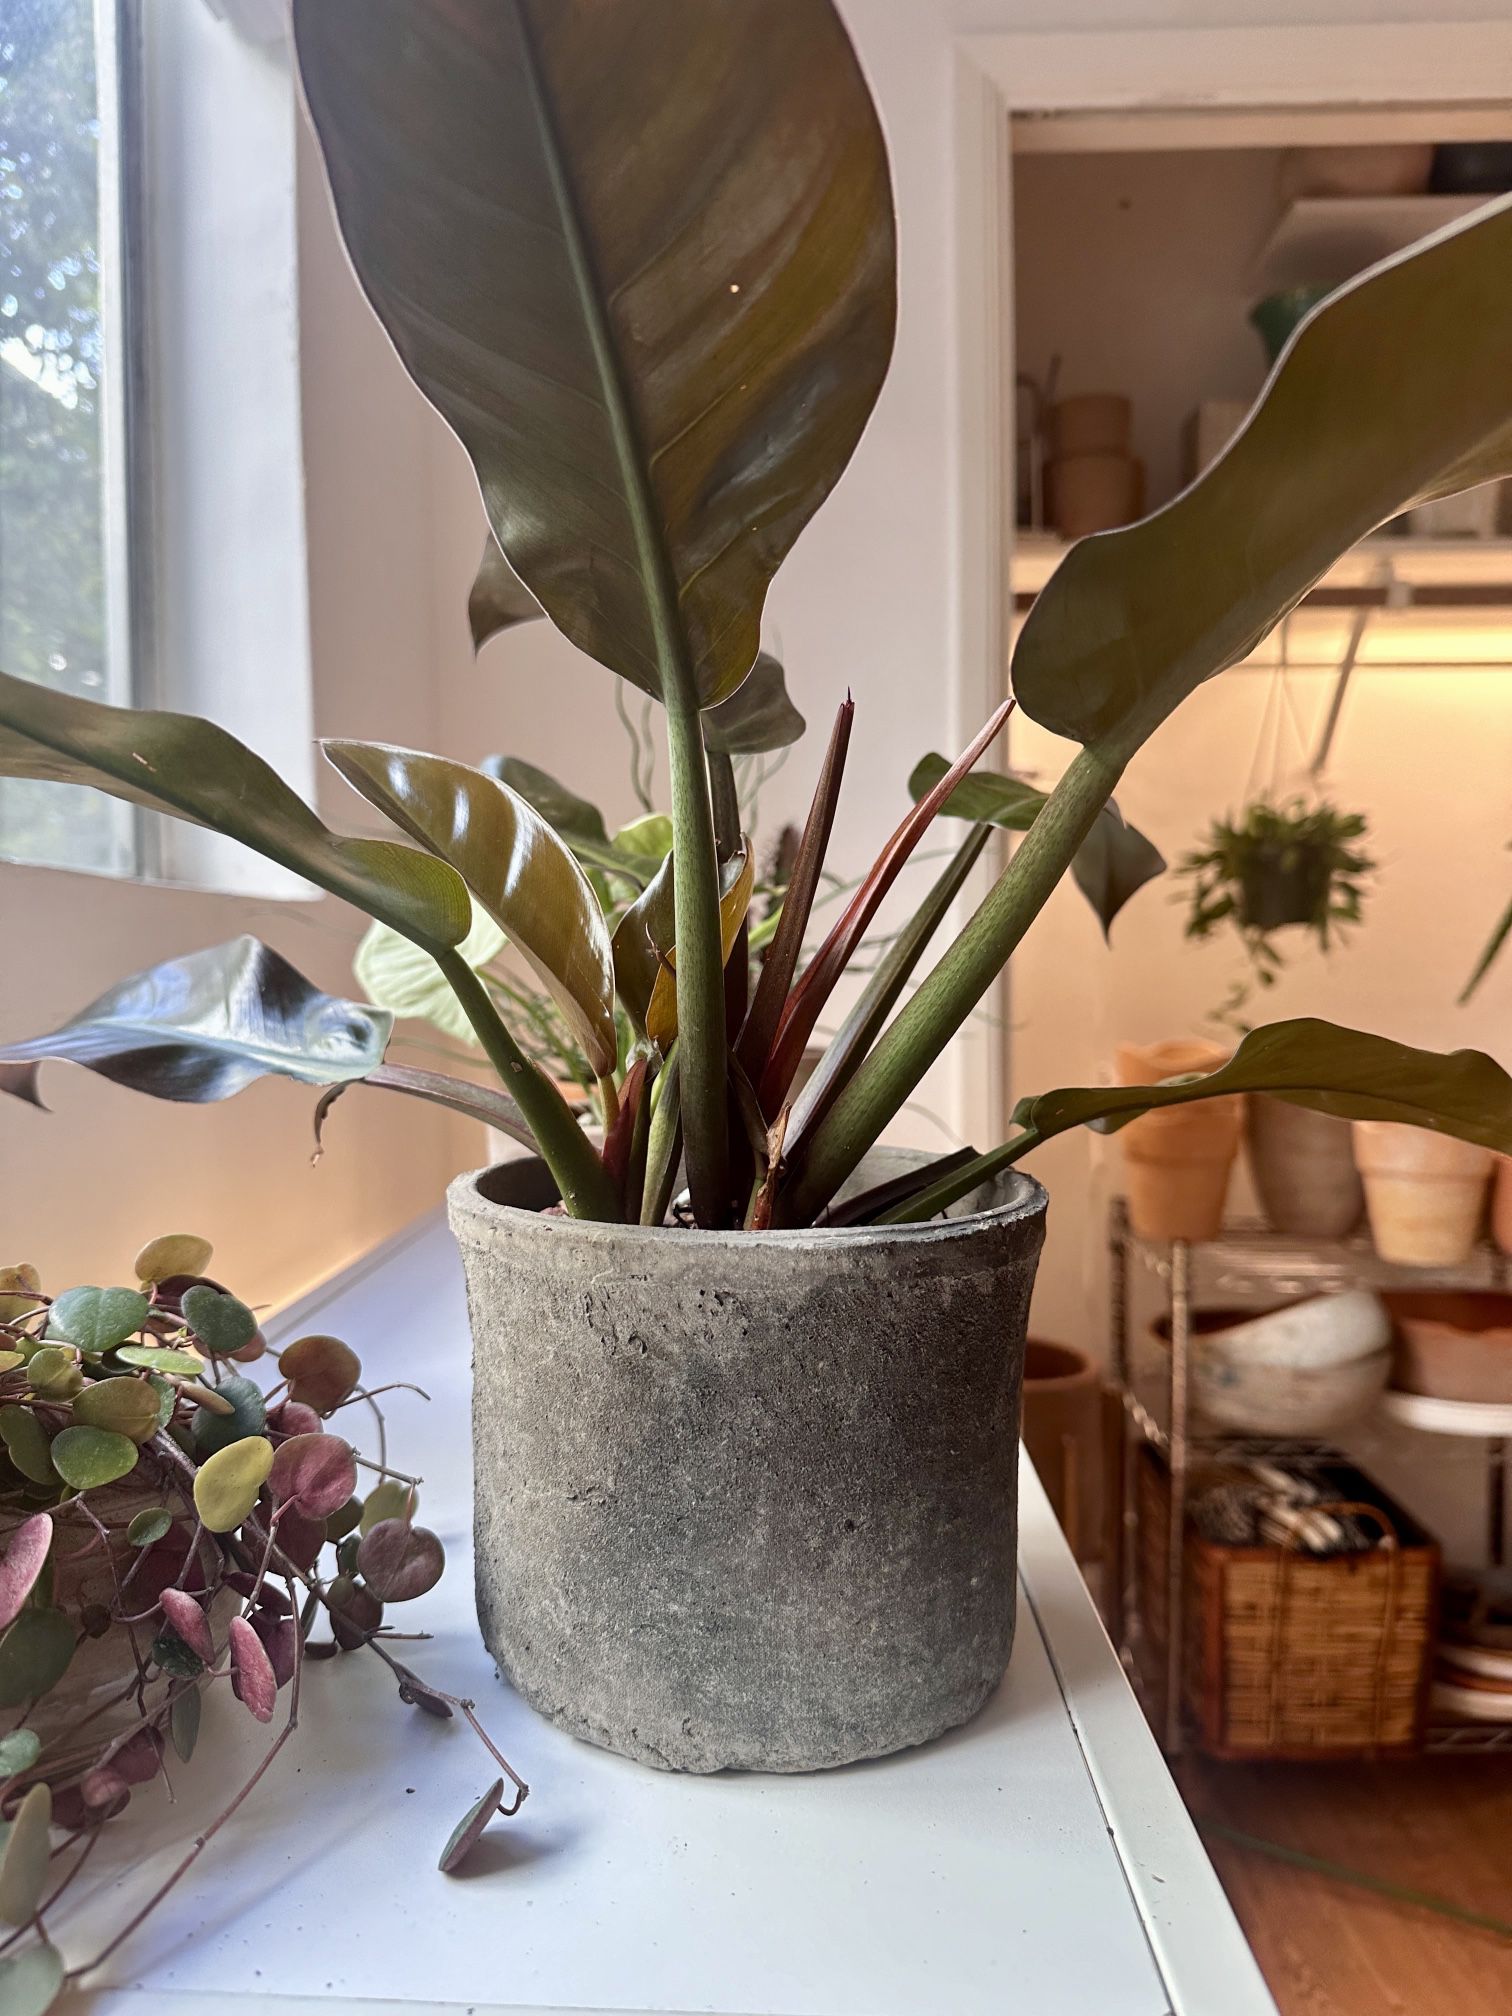 High End Plant Designs In Pots - Houseplants, Trees, Succulents, Cactus (Prices Vary!)